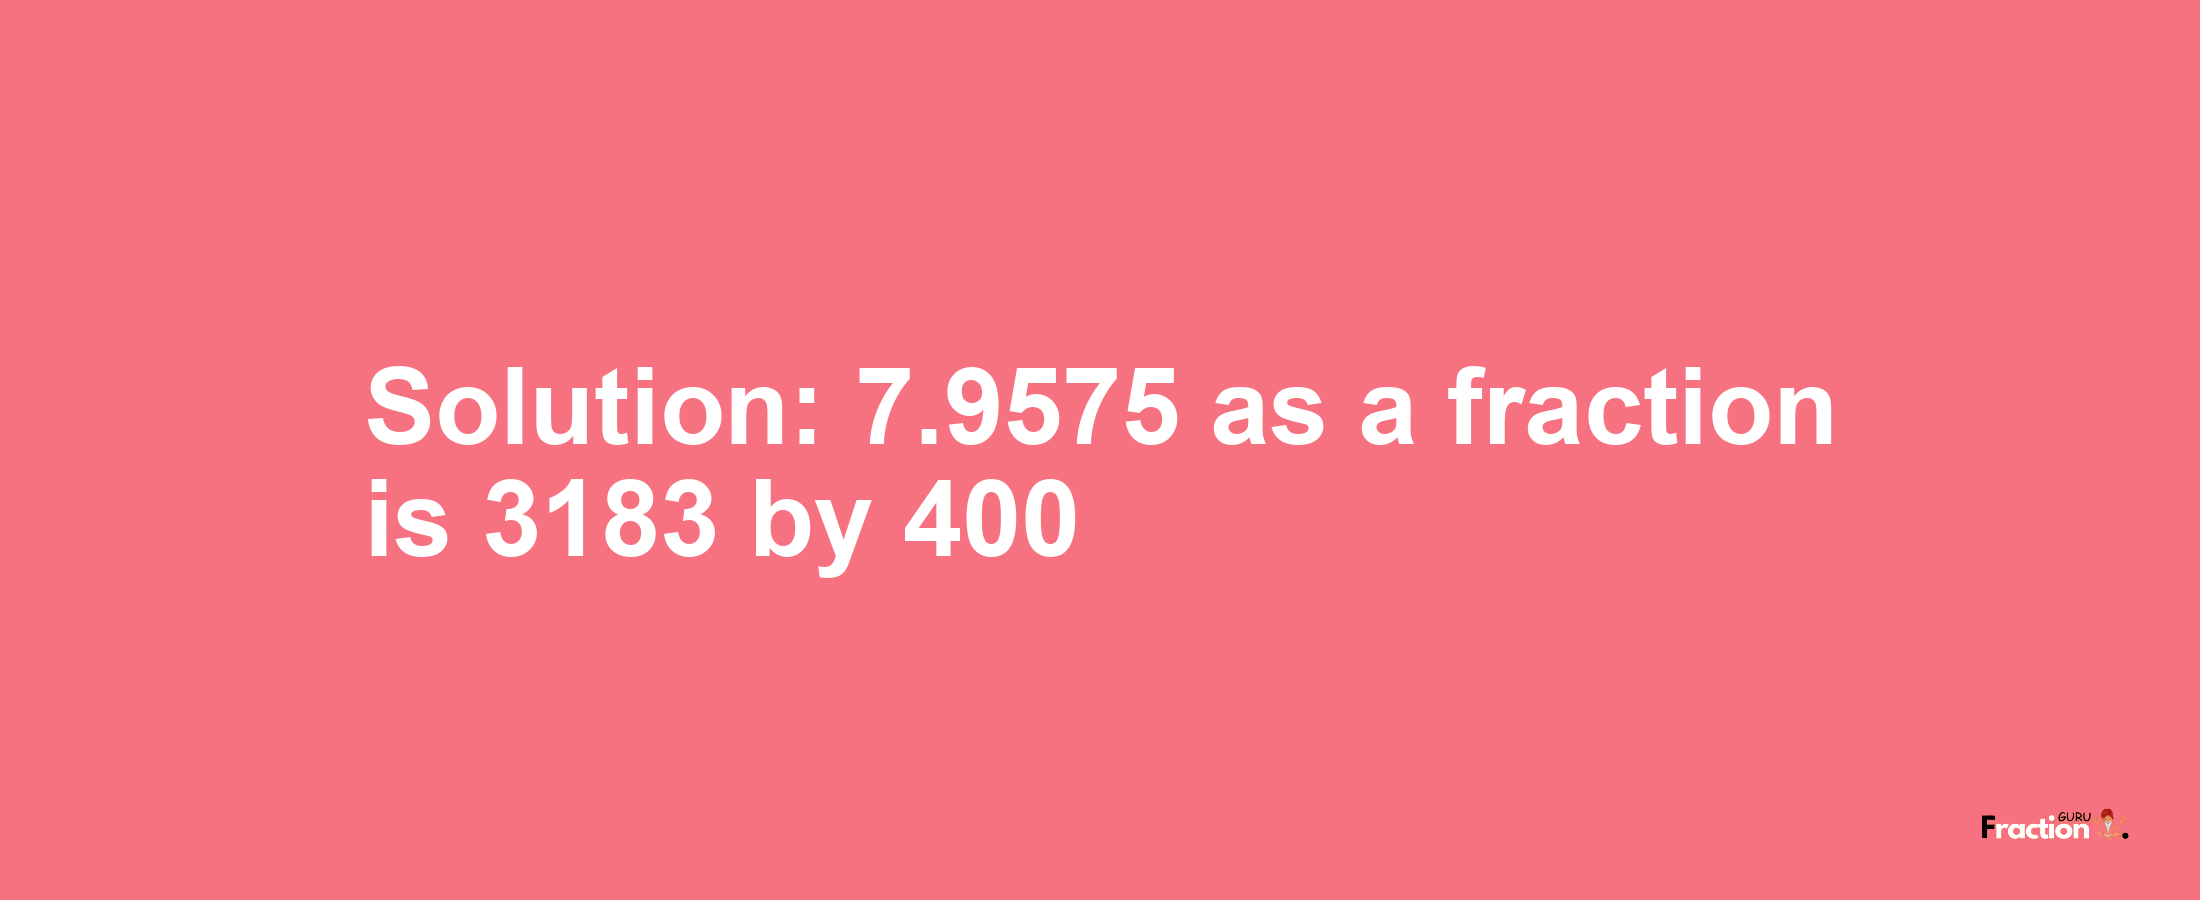 Solution:7.9575 as a fraction is 3183/400